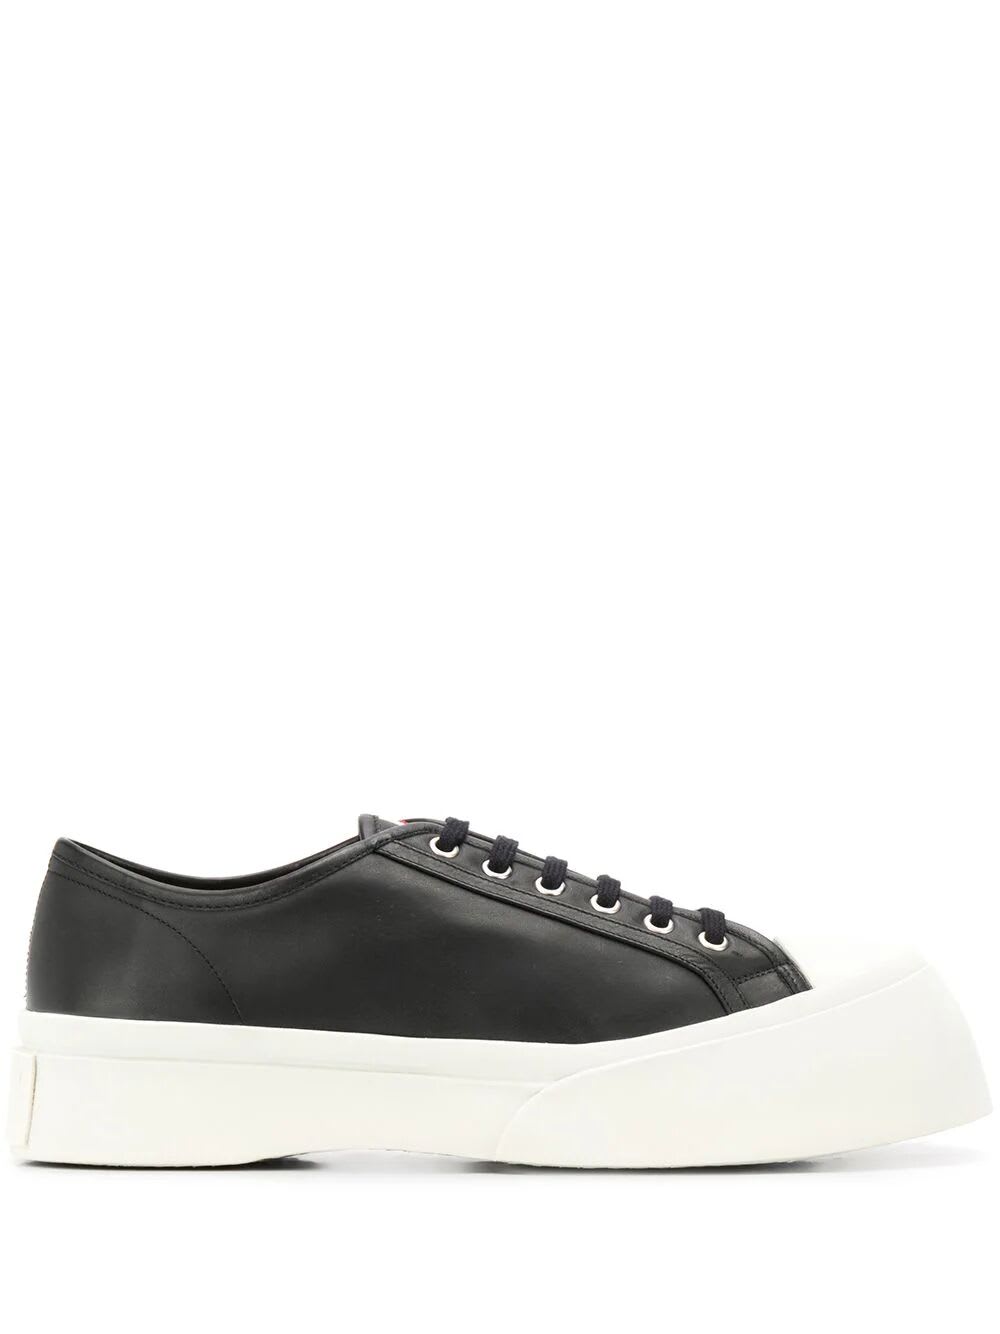 MARNI LACE UP SNEAKERS